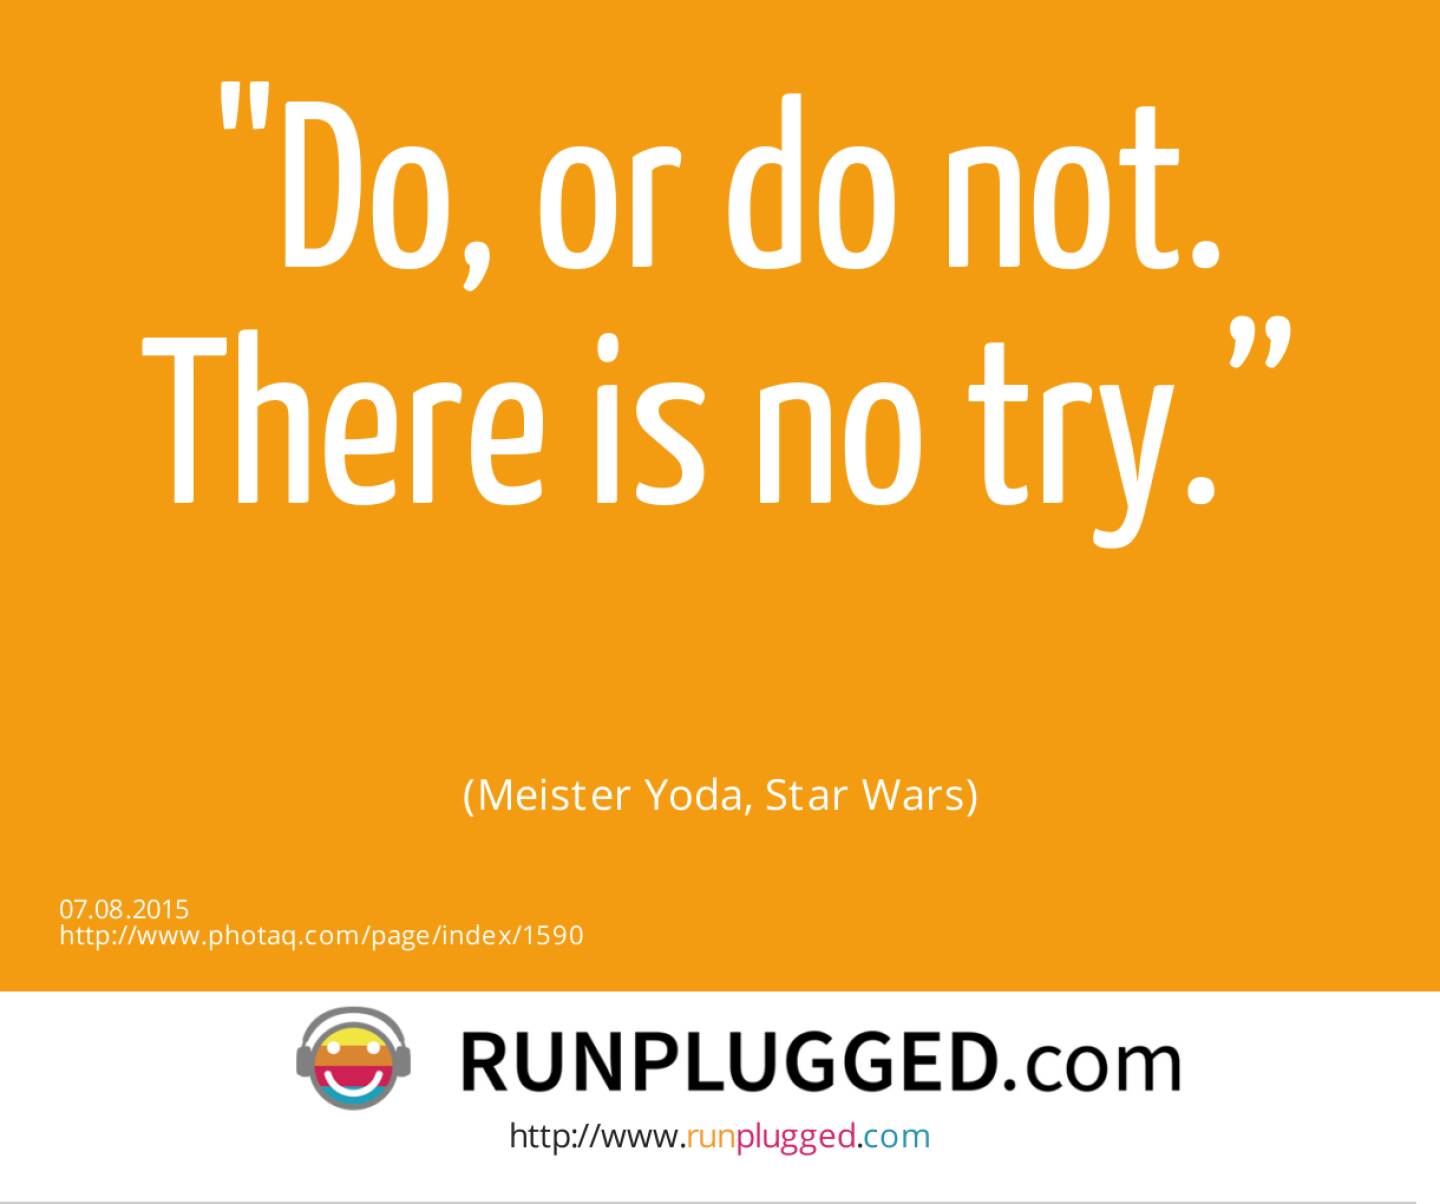 Do, or do not. There is no try.”<br><br> (Meister Yoda, Star Wars)